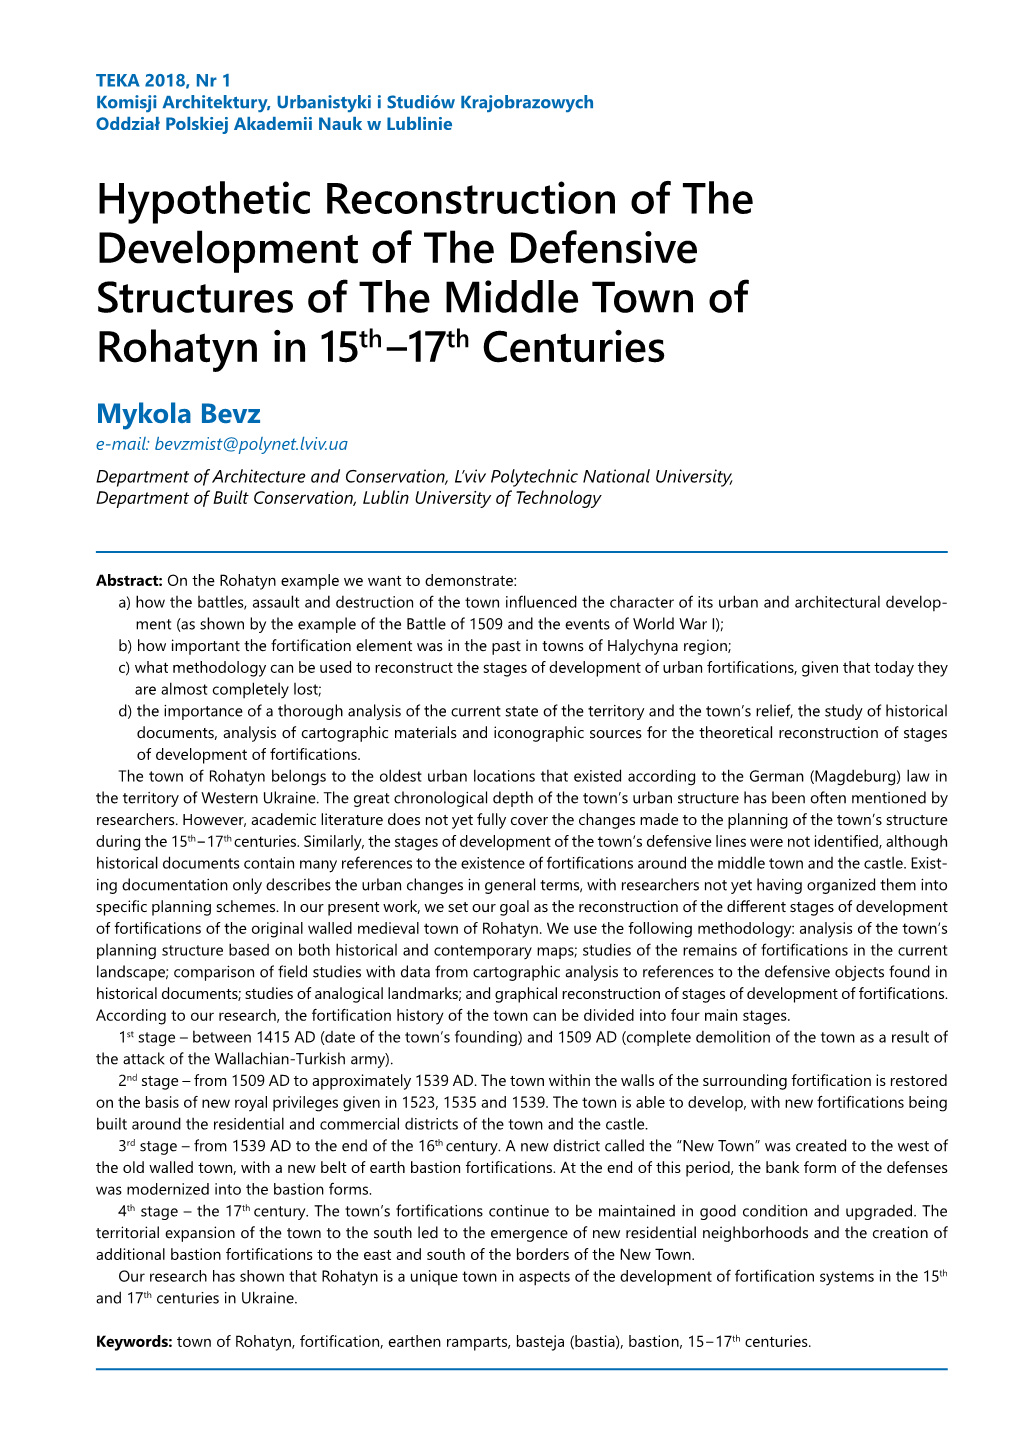 Hypothetic Reconstruction of the Development of the Defensive